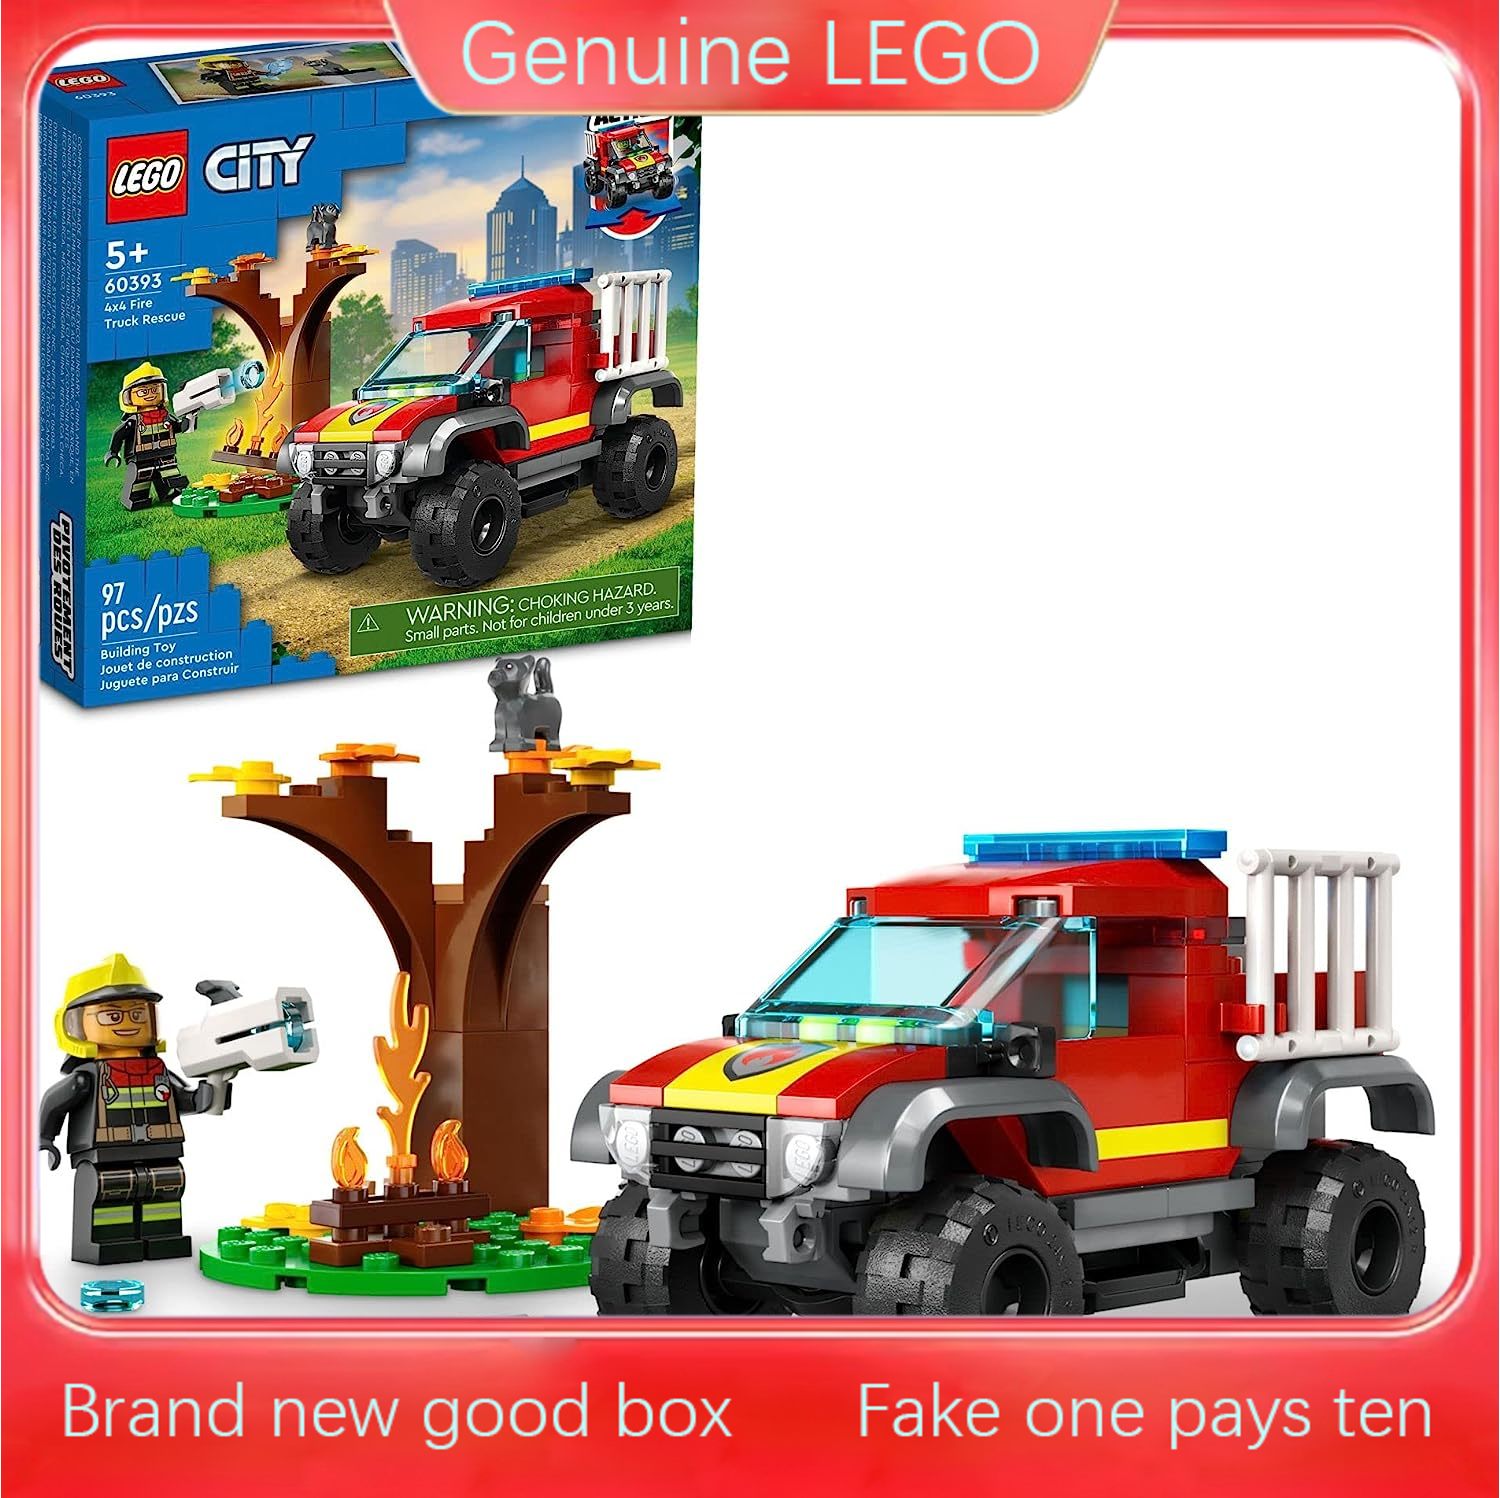 LEGO City 4x4 Fire Engine Rescue Truck Toy Set 60393 